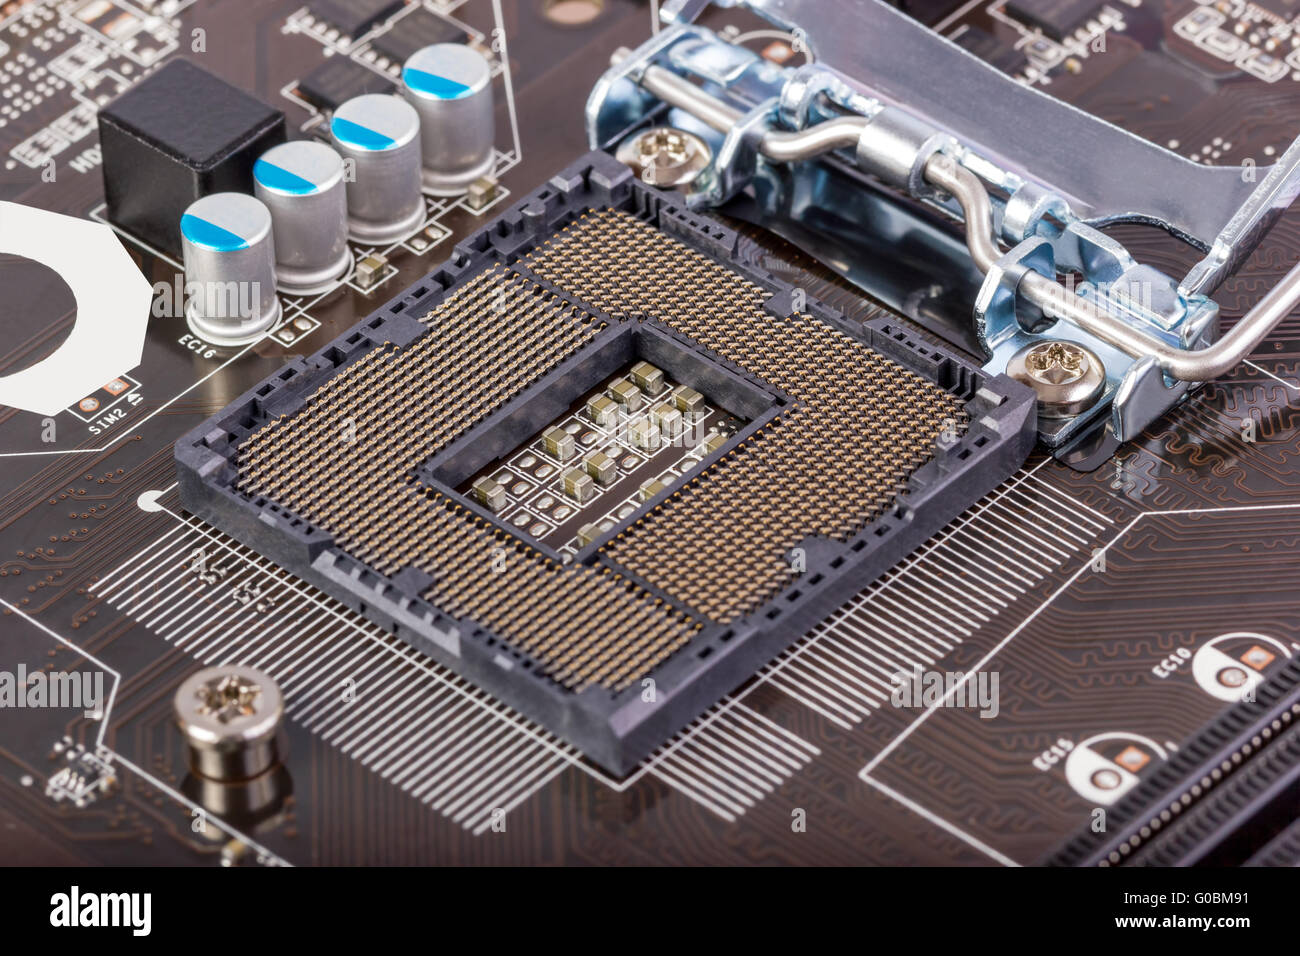 Empty CPU processor socket with pins on motherboar Stock Photo